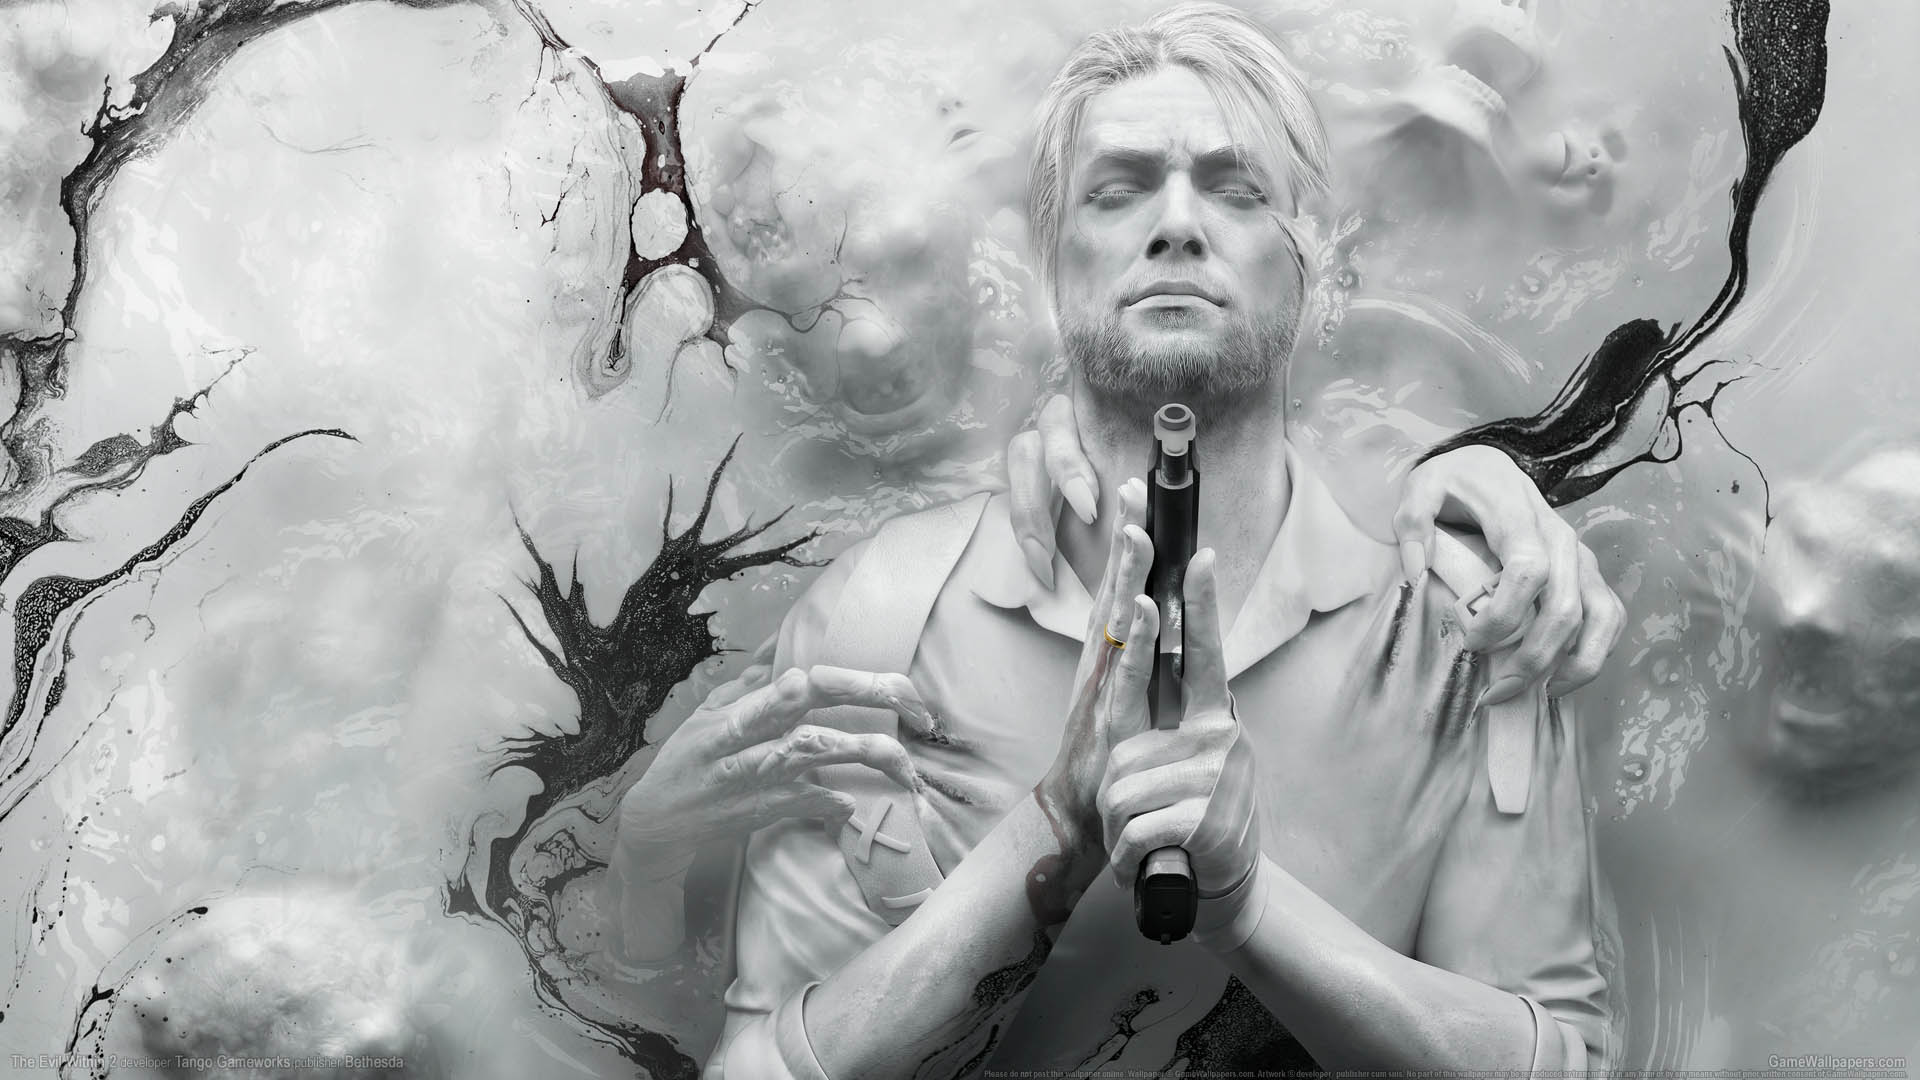 1080p-the-evil-within-2-hd-wallpaper